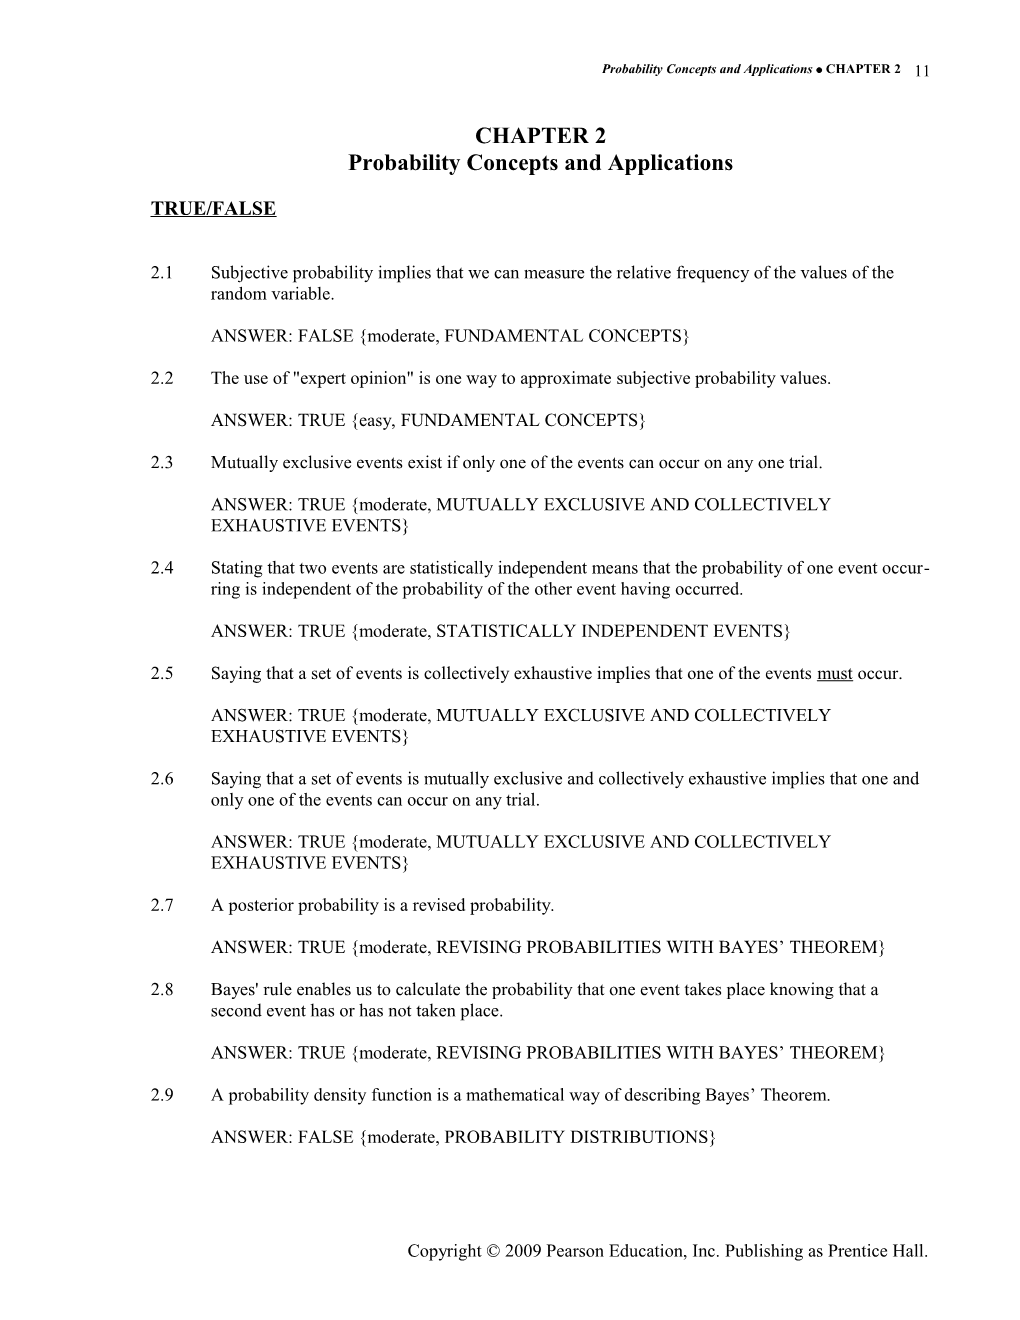 Probability Concepts and Applications CHAPTER 2